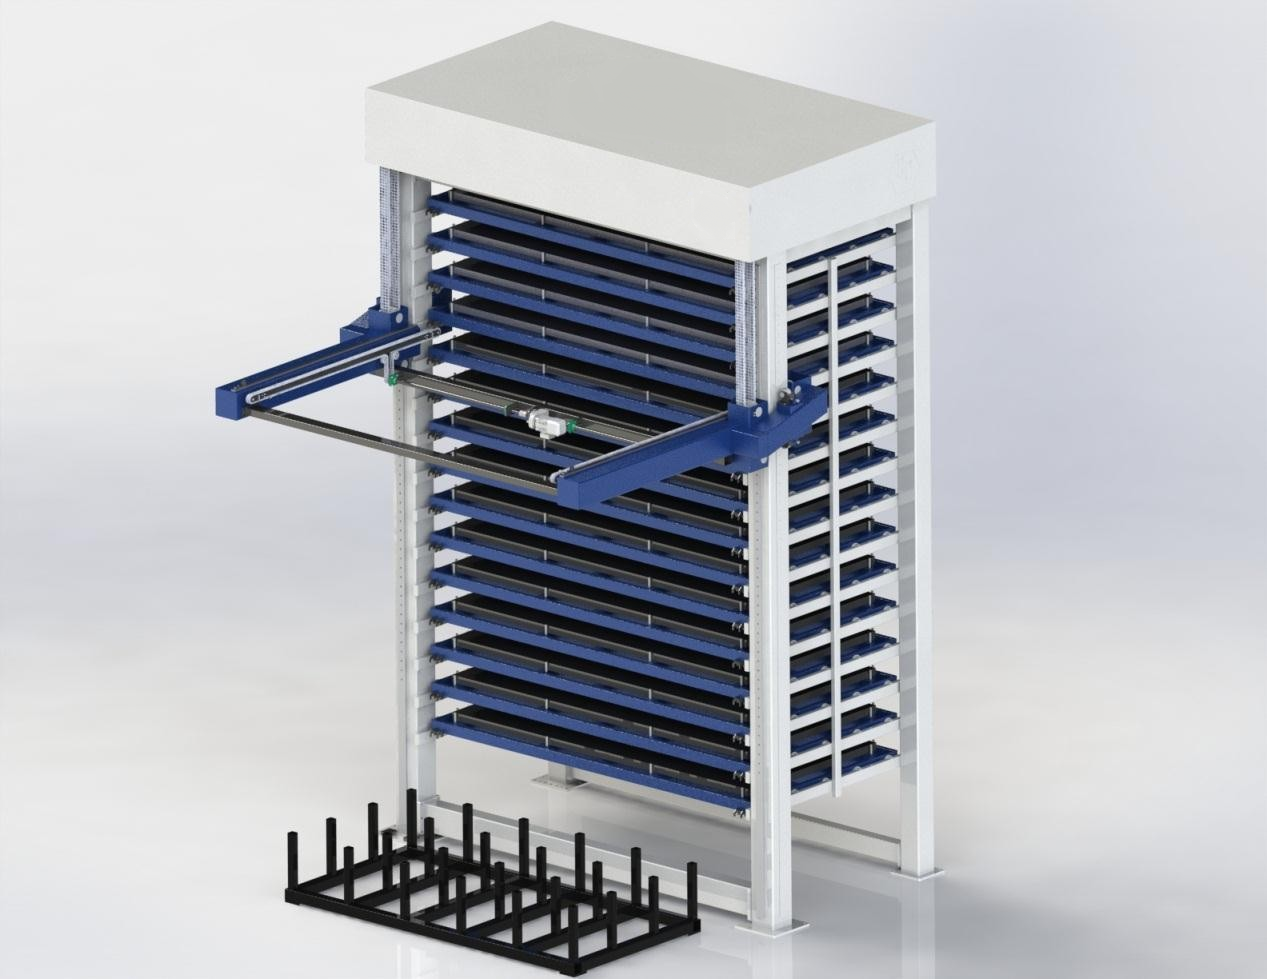 Solutions for sheet metal storage systems: Sheet Metal Storage System VLS